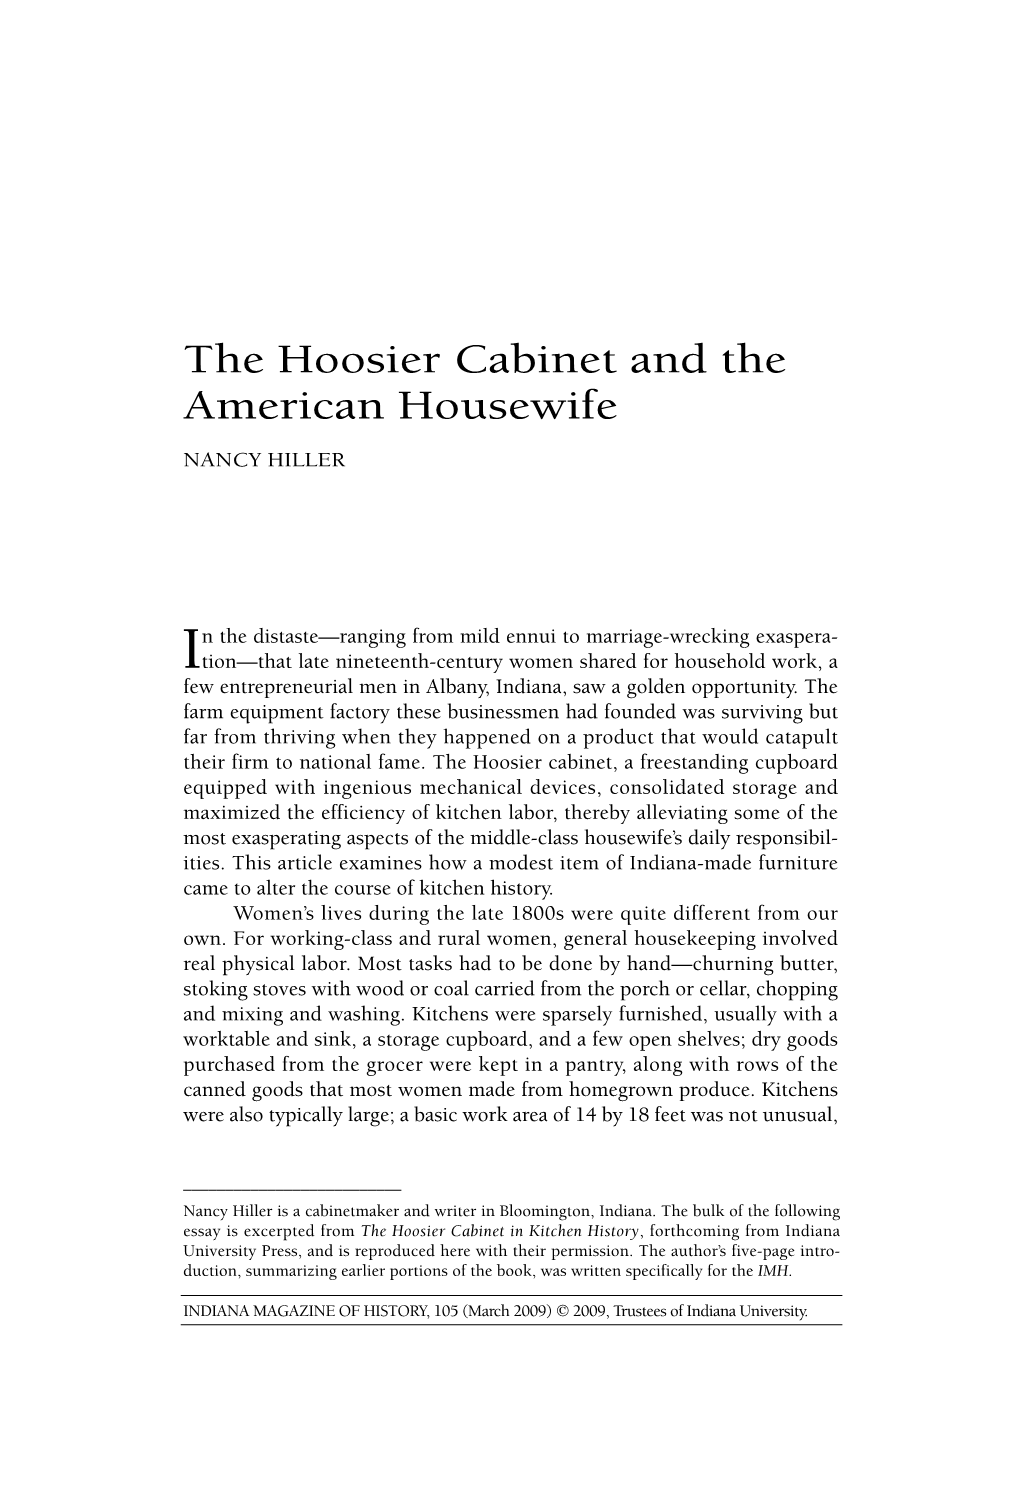 The Hoosier Cabinet and the American Housewife